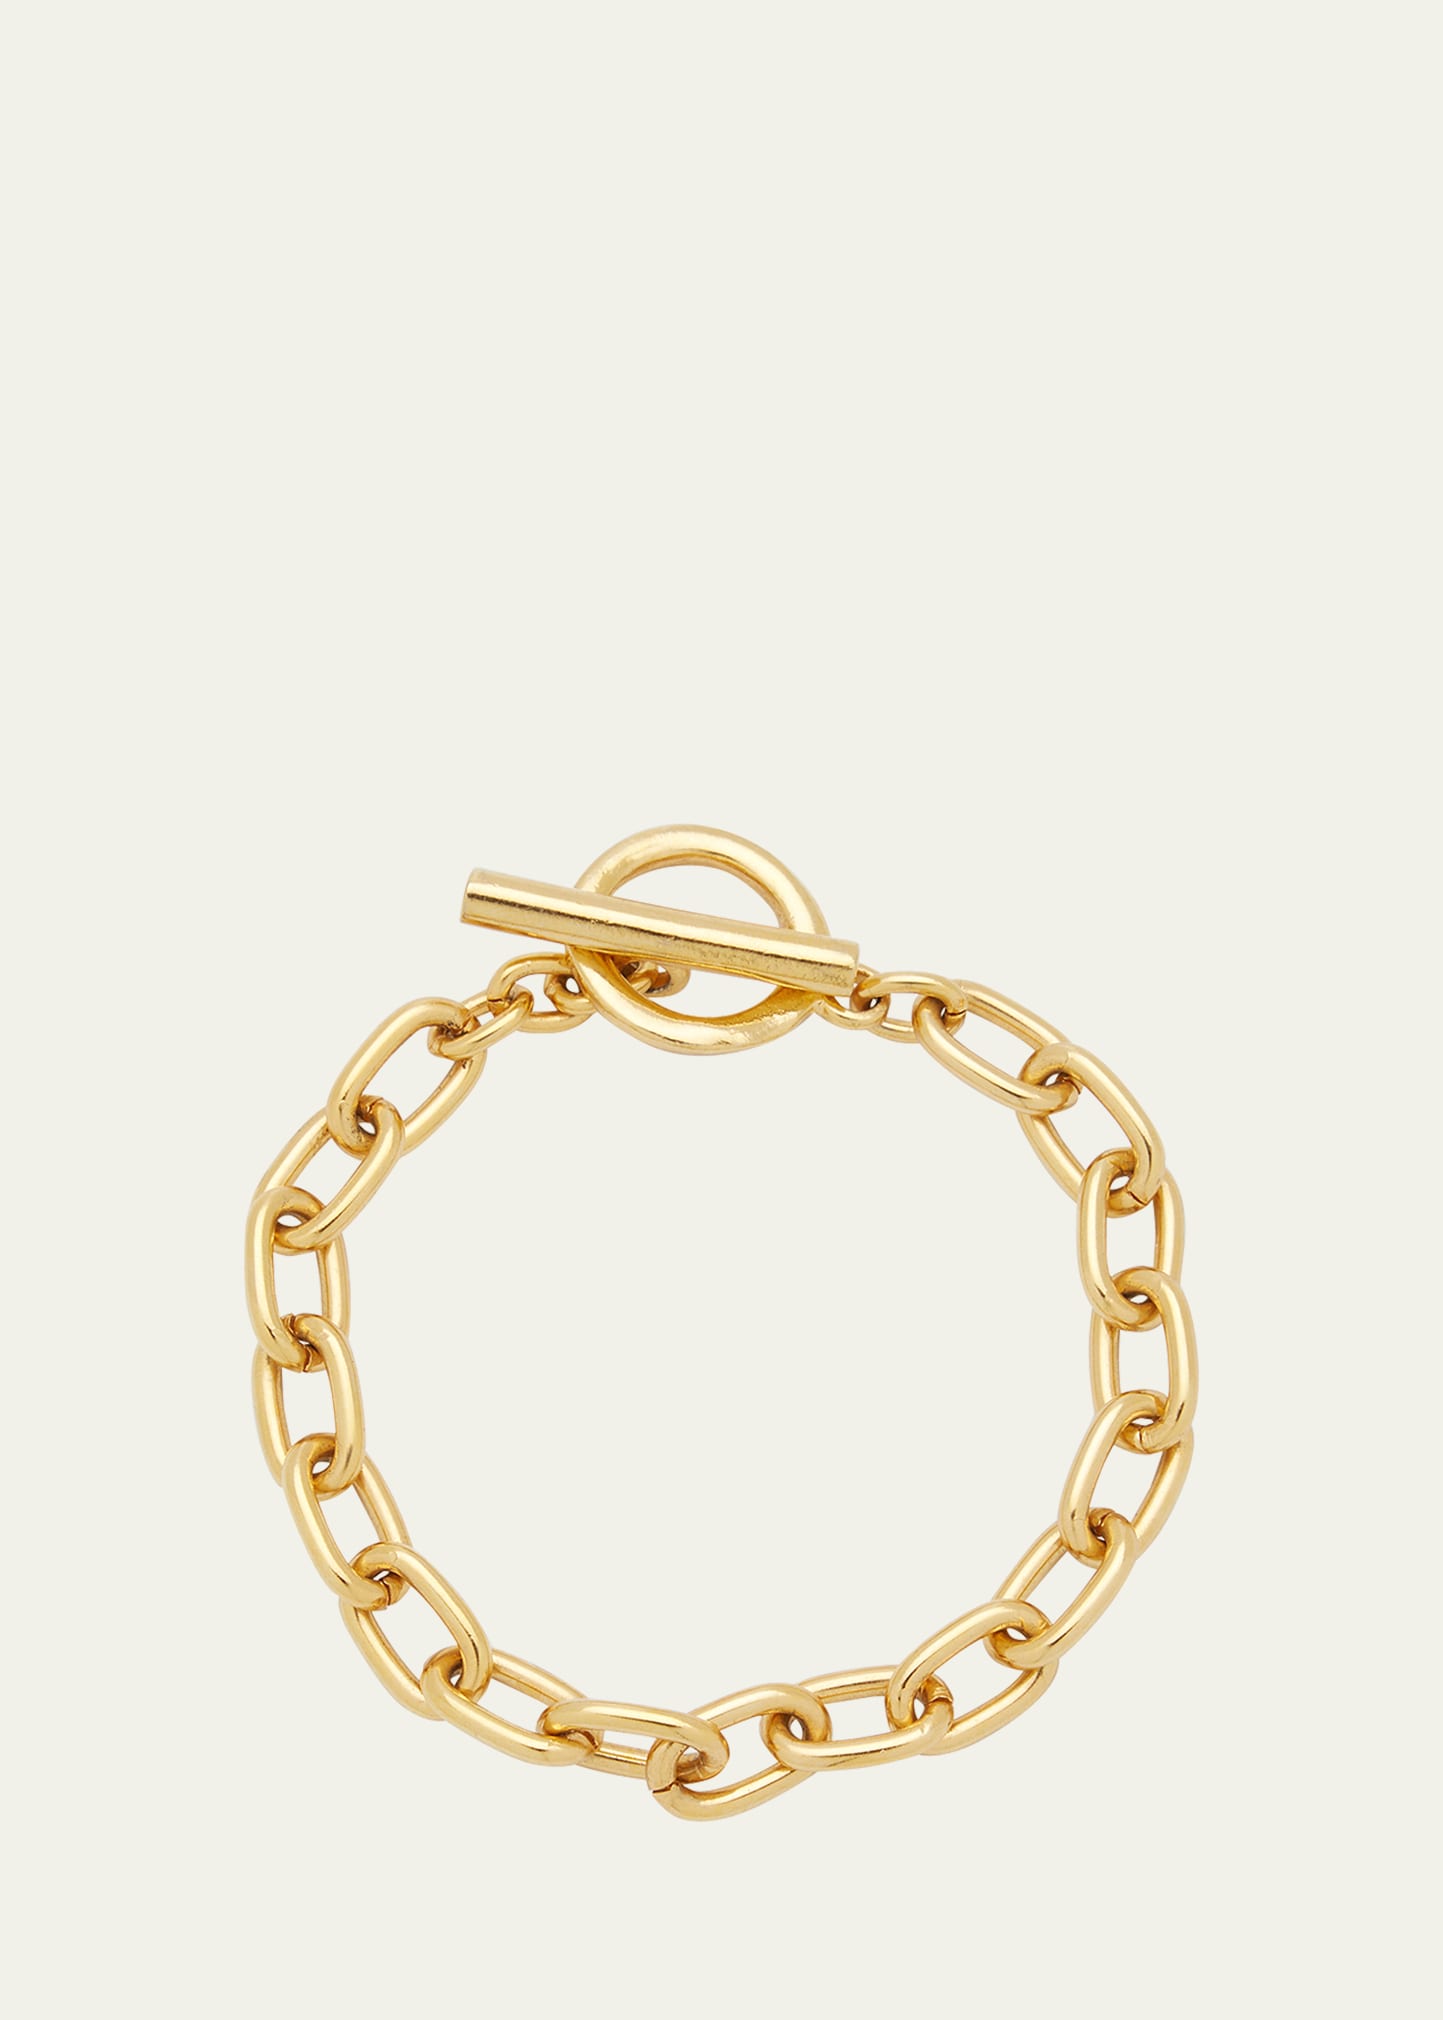 Ben-amun 24k Yellow Gold Electroplate Small Chain Link Bracelet In Yg